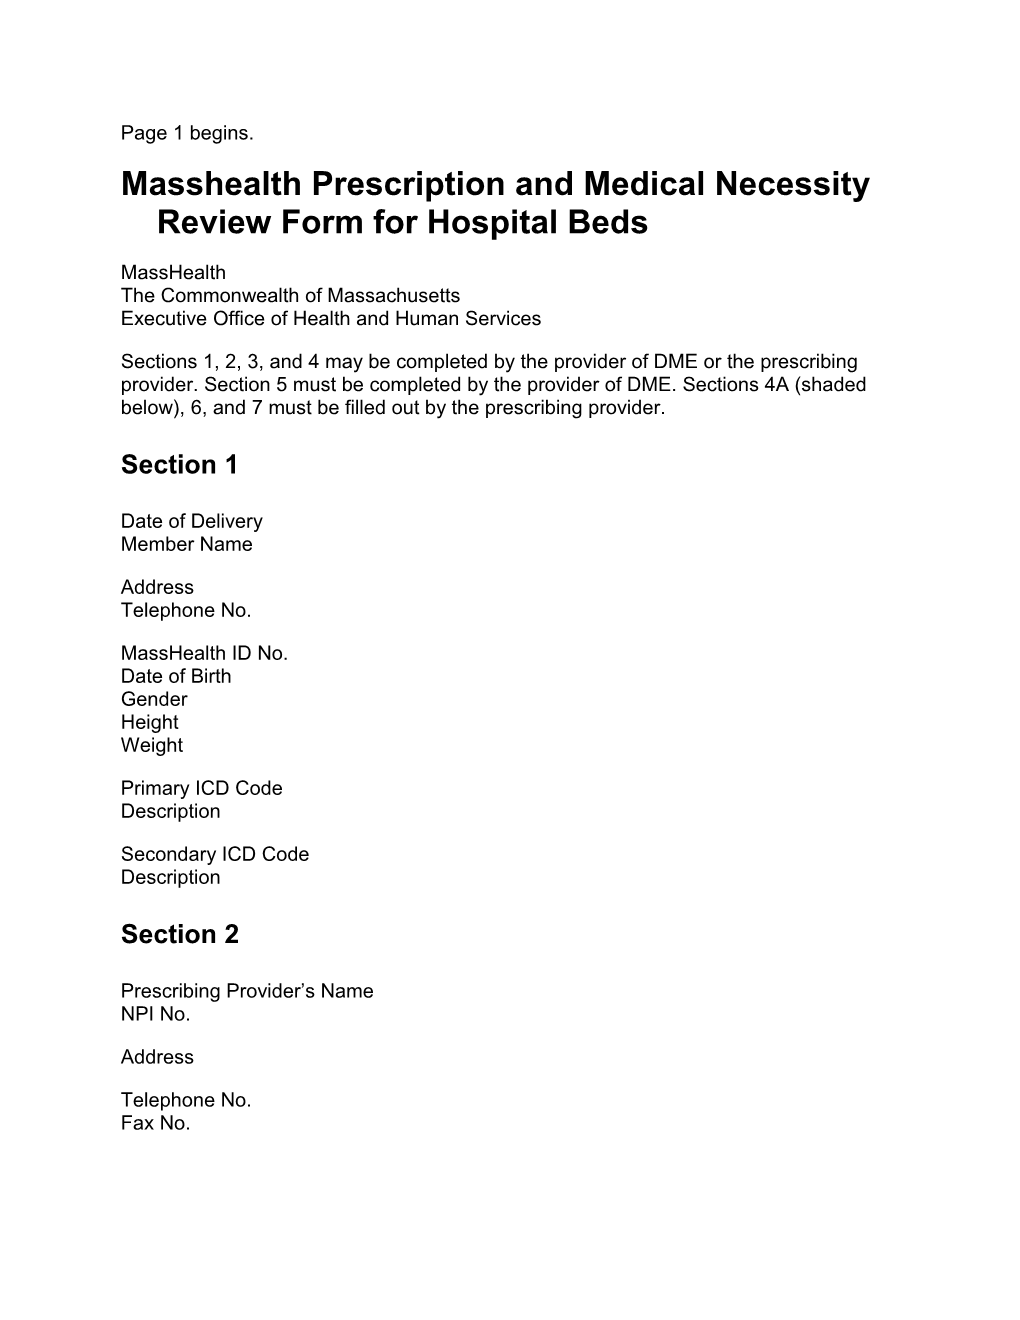 Masshealth Prescription and Medical Necessity Review Form for Hospital Beds